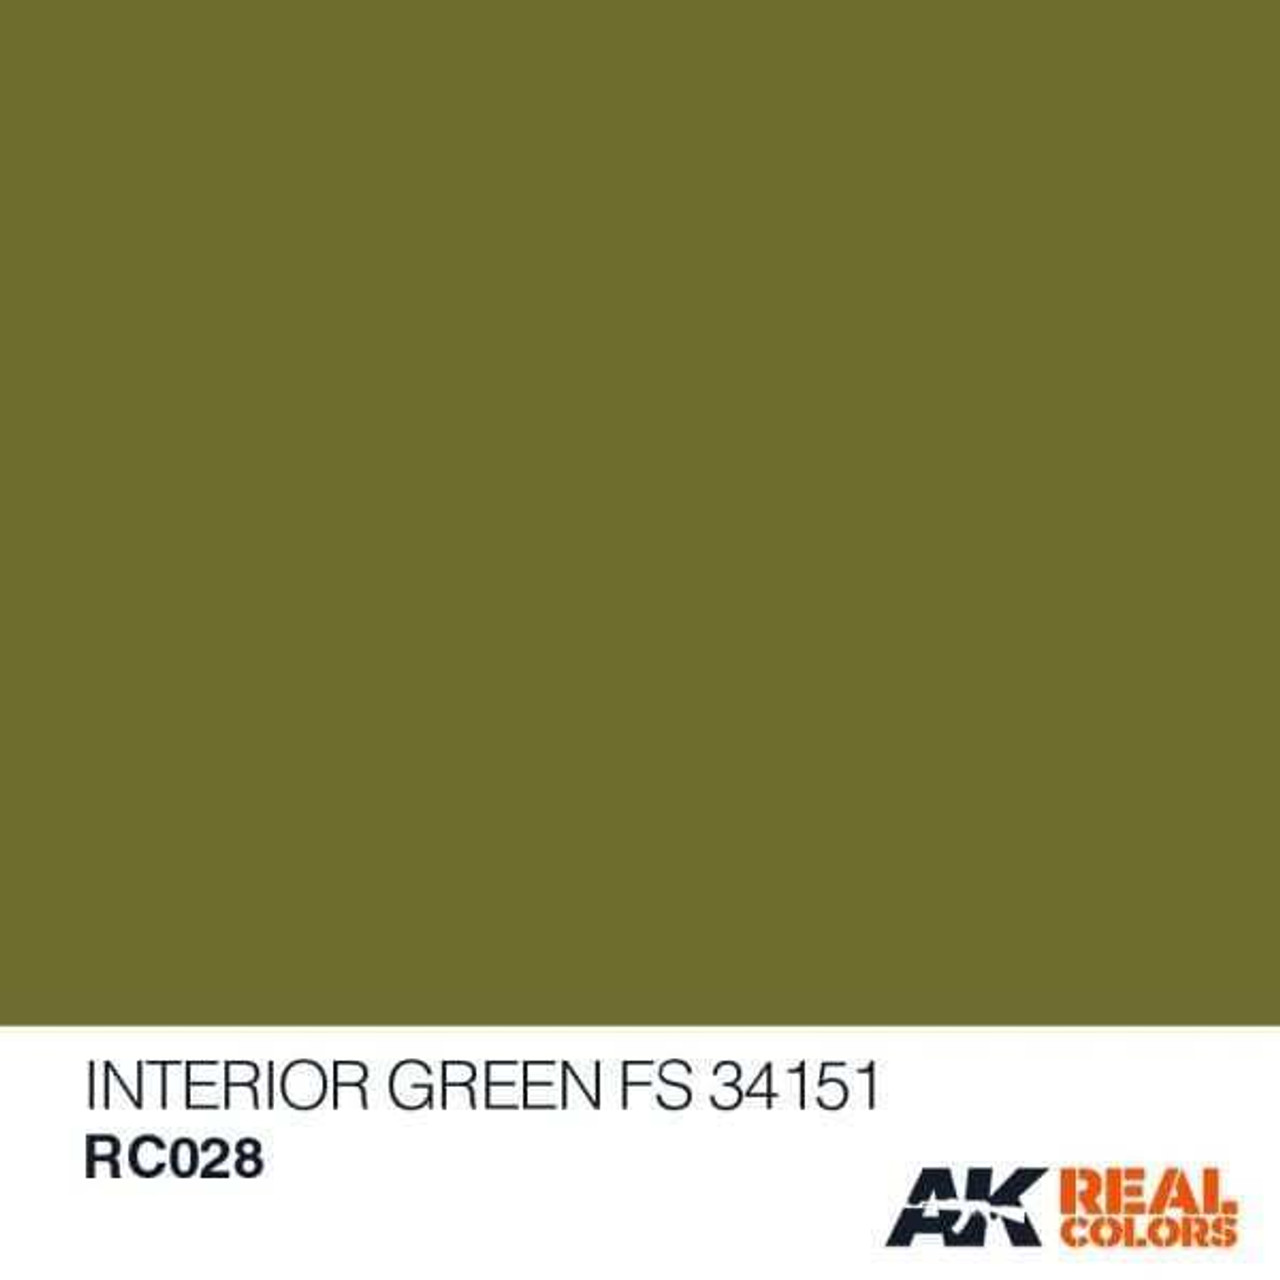 AKIRC28 Real Colors  Light Green FS34151 Acrylic Lacquer Paint 10ml Bottle